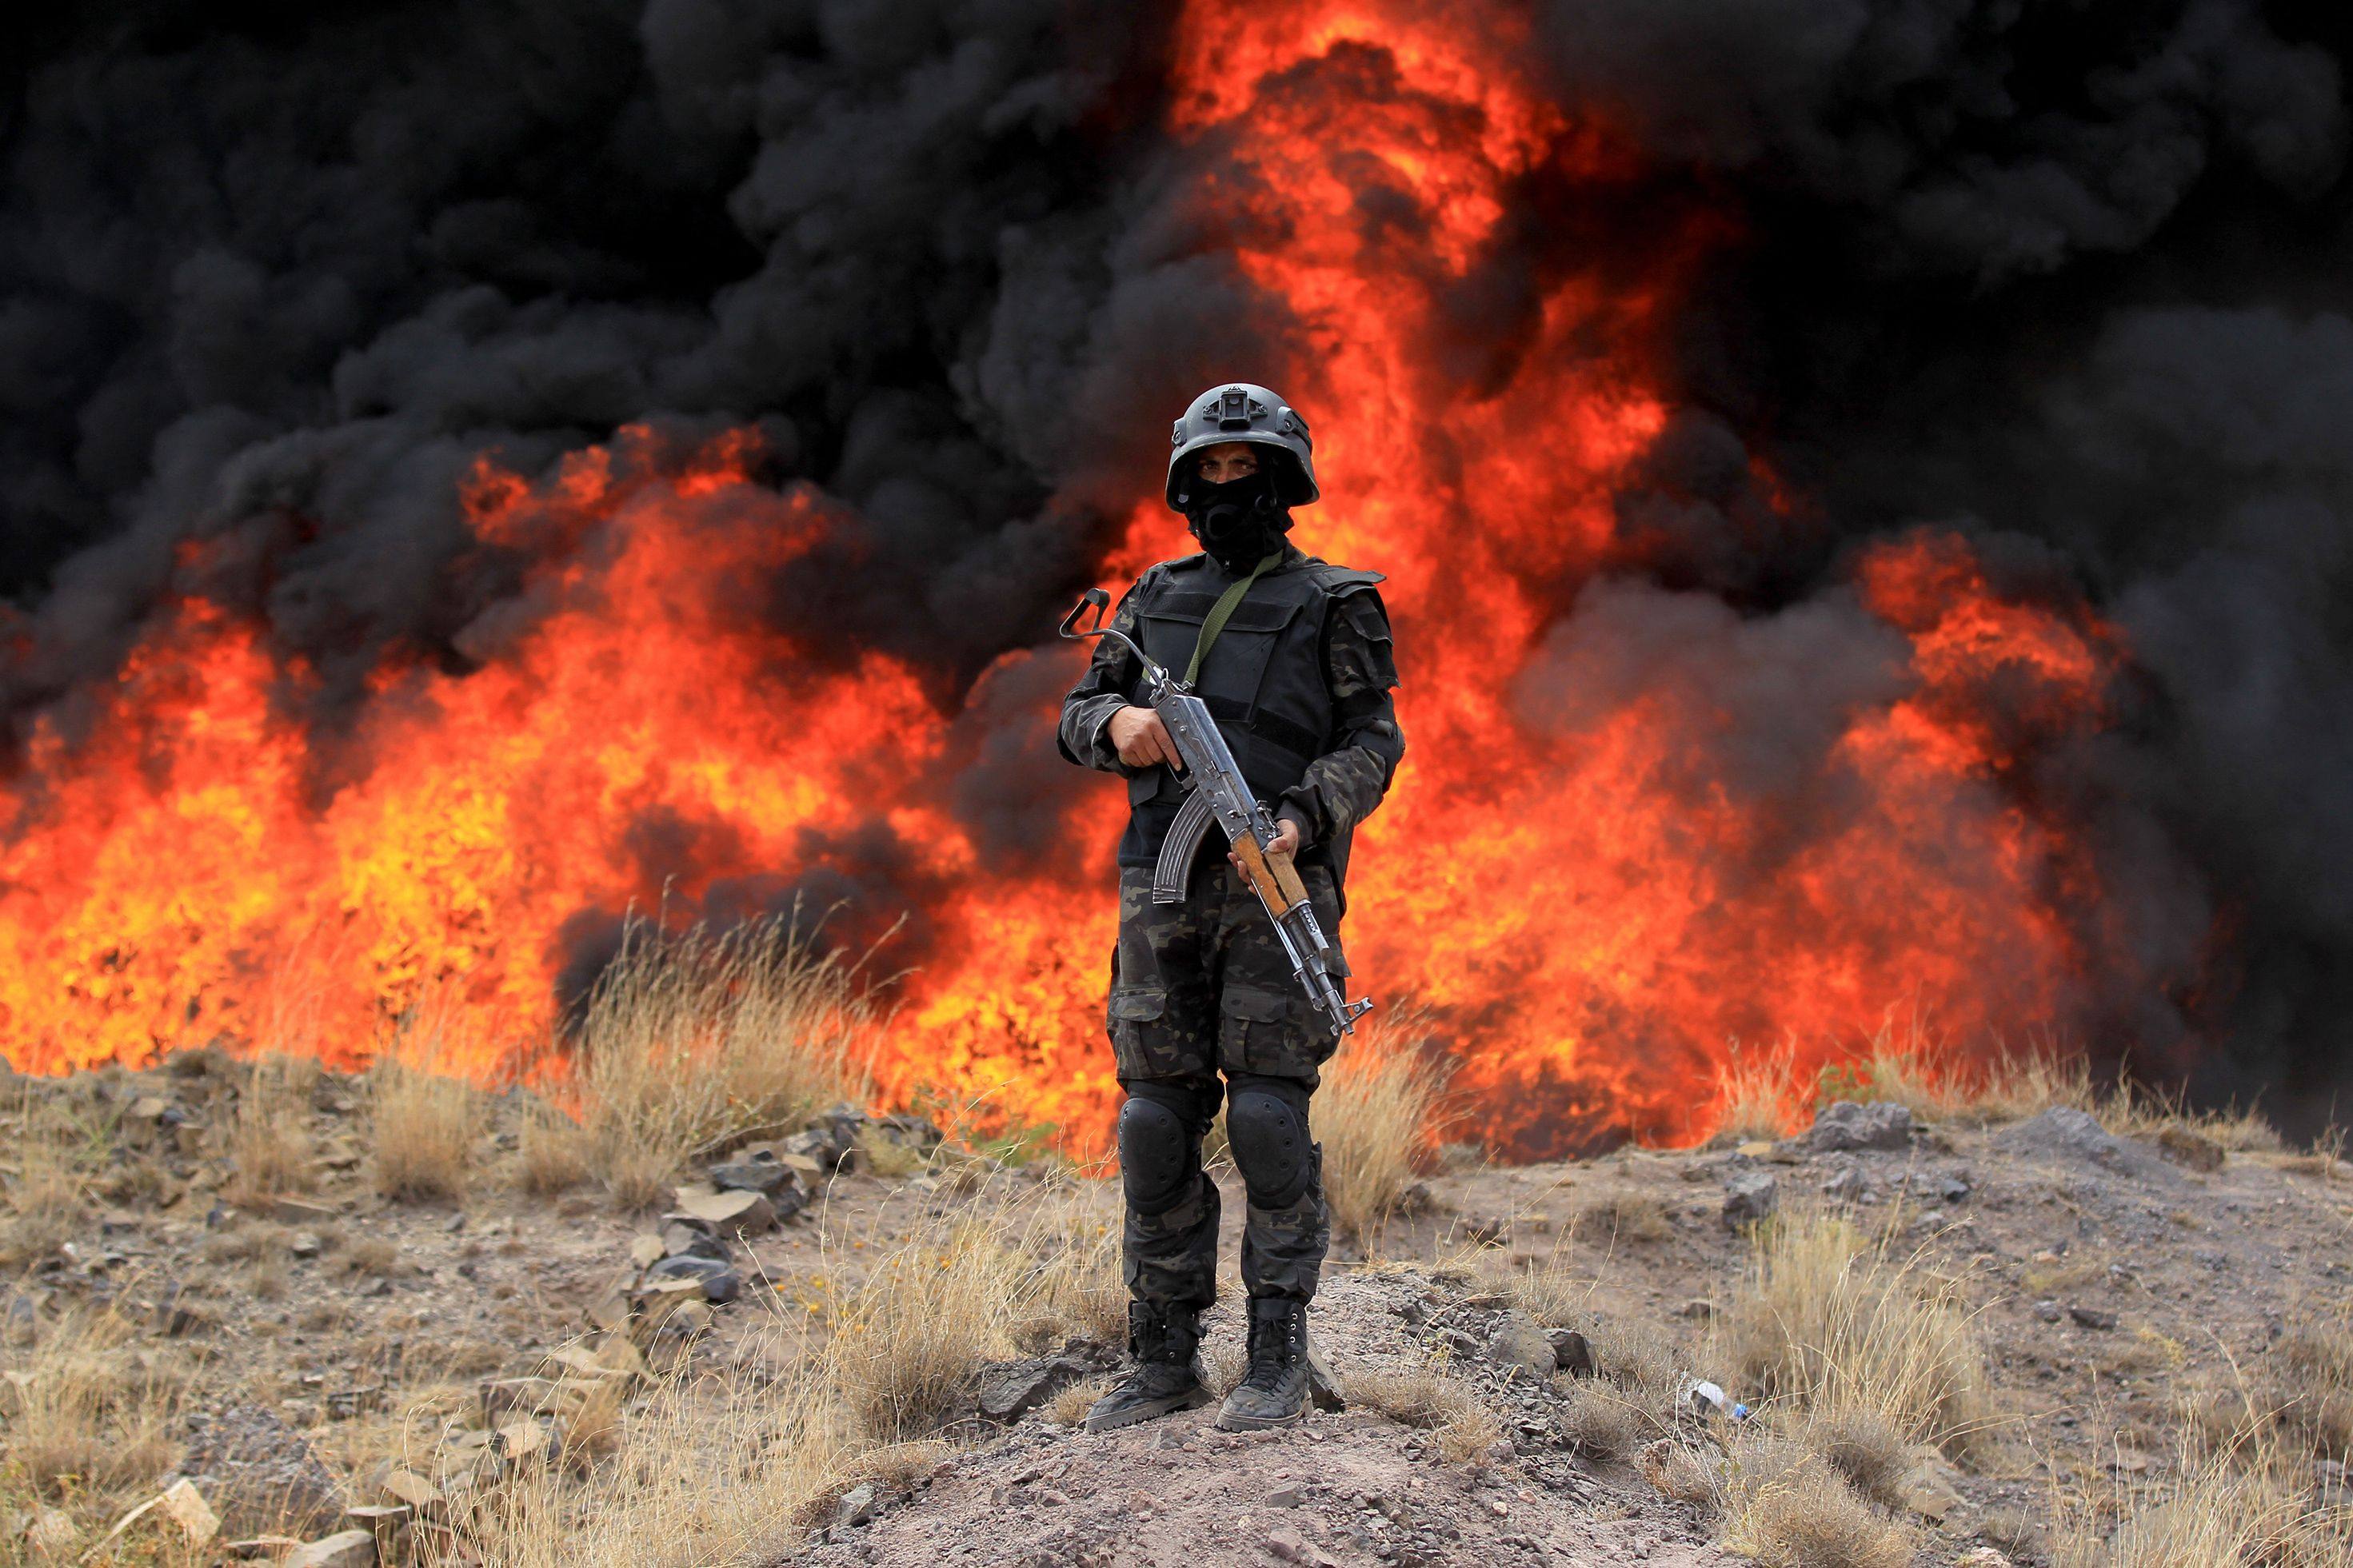 A member of the security forces affiliated with Yemen’s Houthi rebels stands guard in front of a bonfire incinerating seized narcotic substances, in Sanaa on Saturday. Photo: AFP